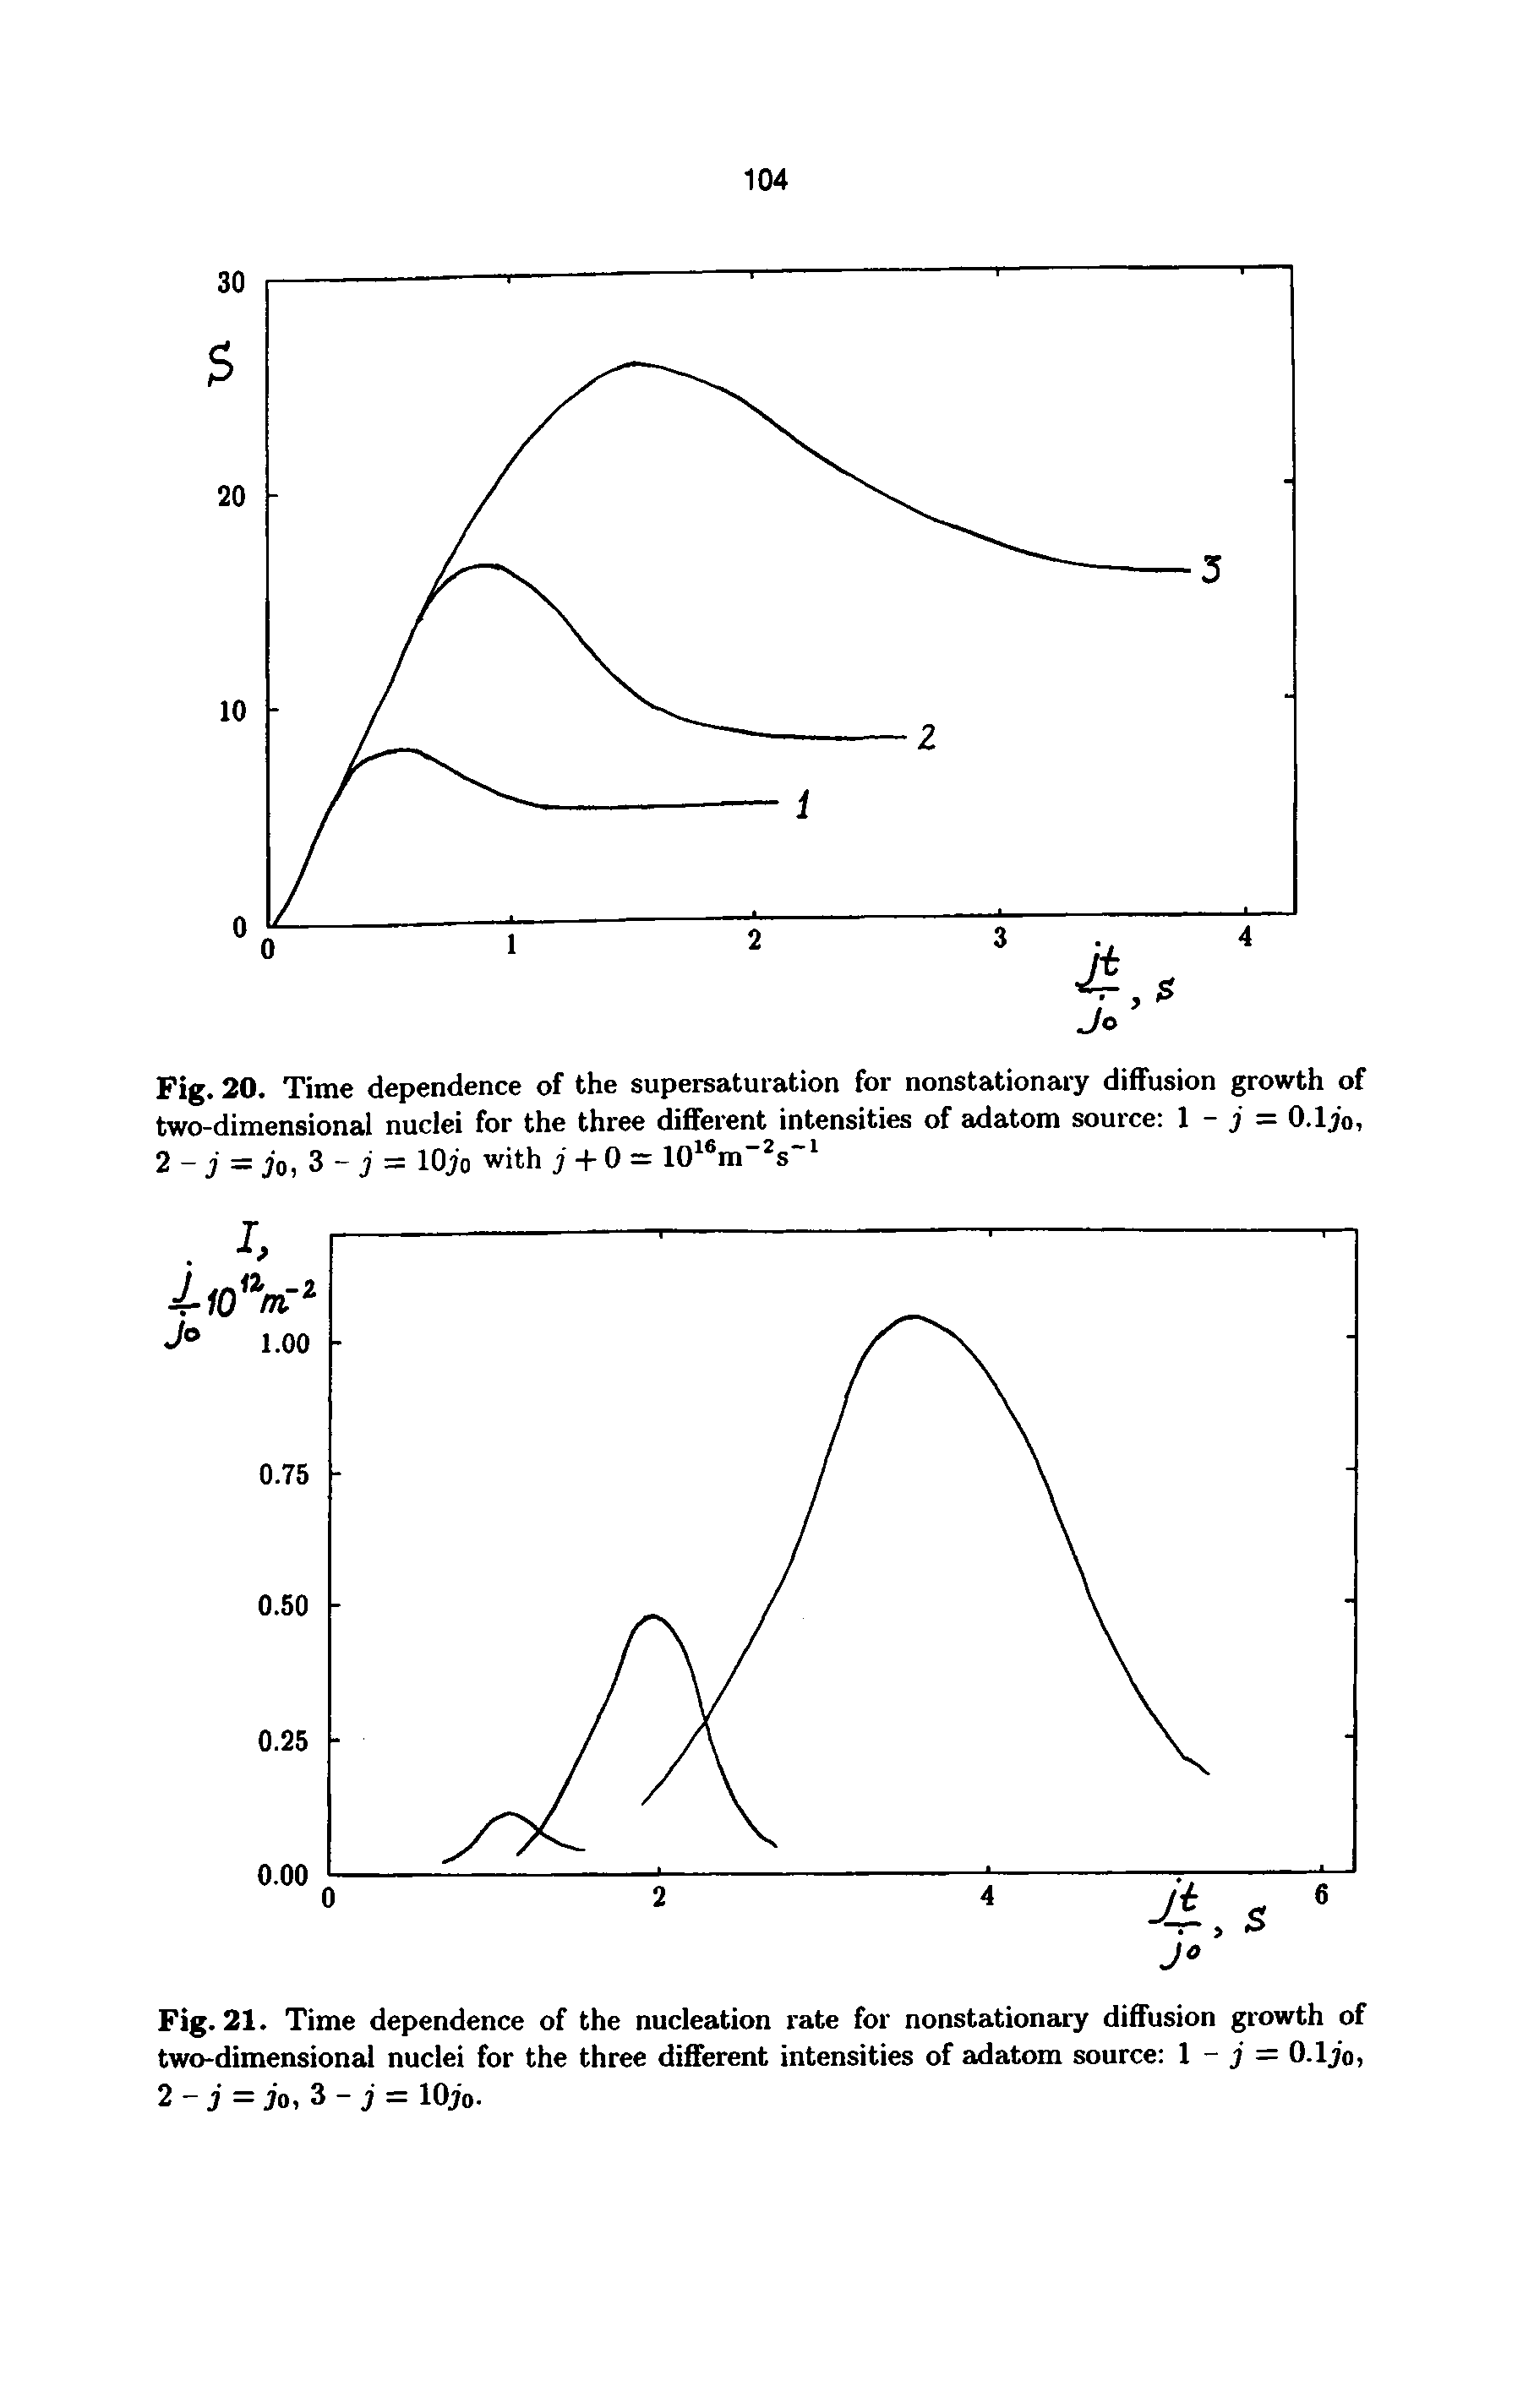 Fig. 20. Time dependence of the supersaturation for nonstationary diffusion growth of two-dimensional nuclei for the three different intensities of adatom source 1 - j = O.ljo, 2- j — jo, 3 - j = lOjo with j -I- 0 = 10 m" s ...